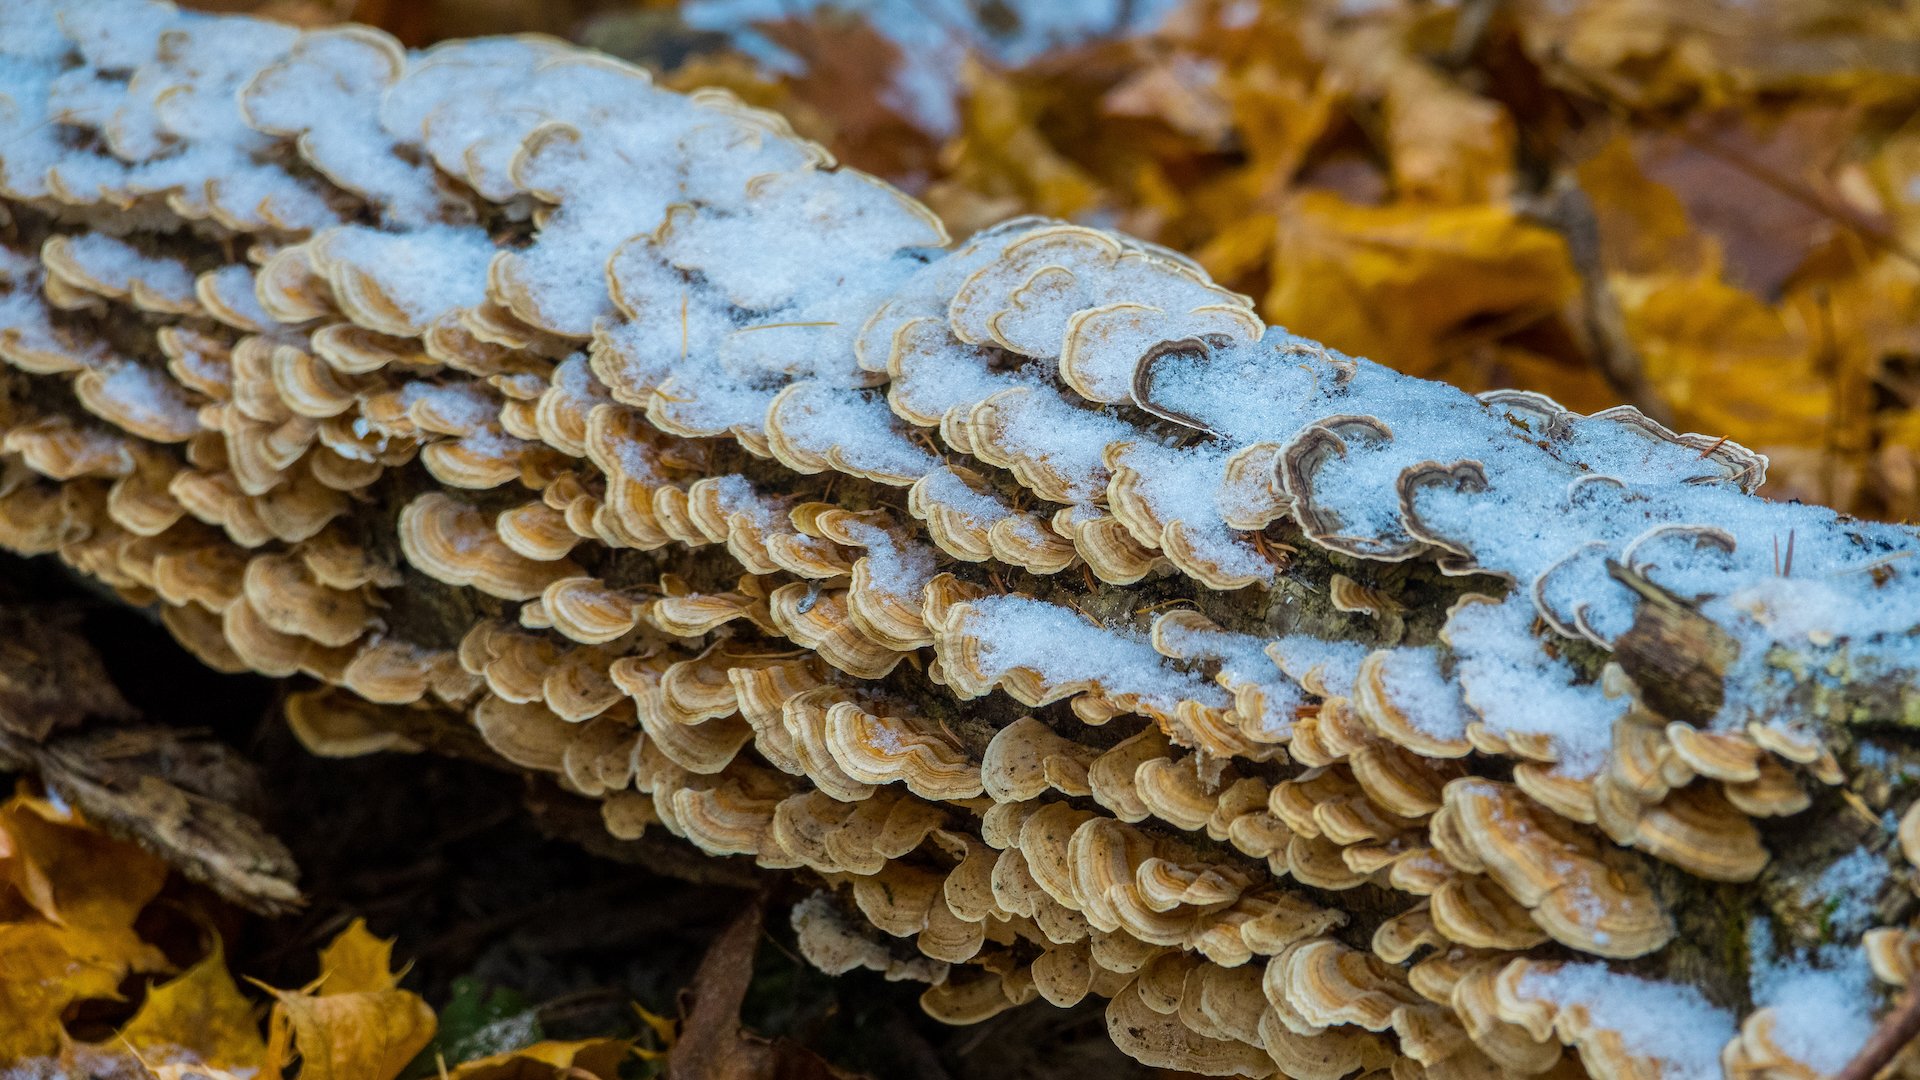  Some cool mushrooms, all frosted over. 